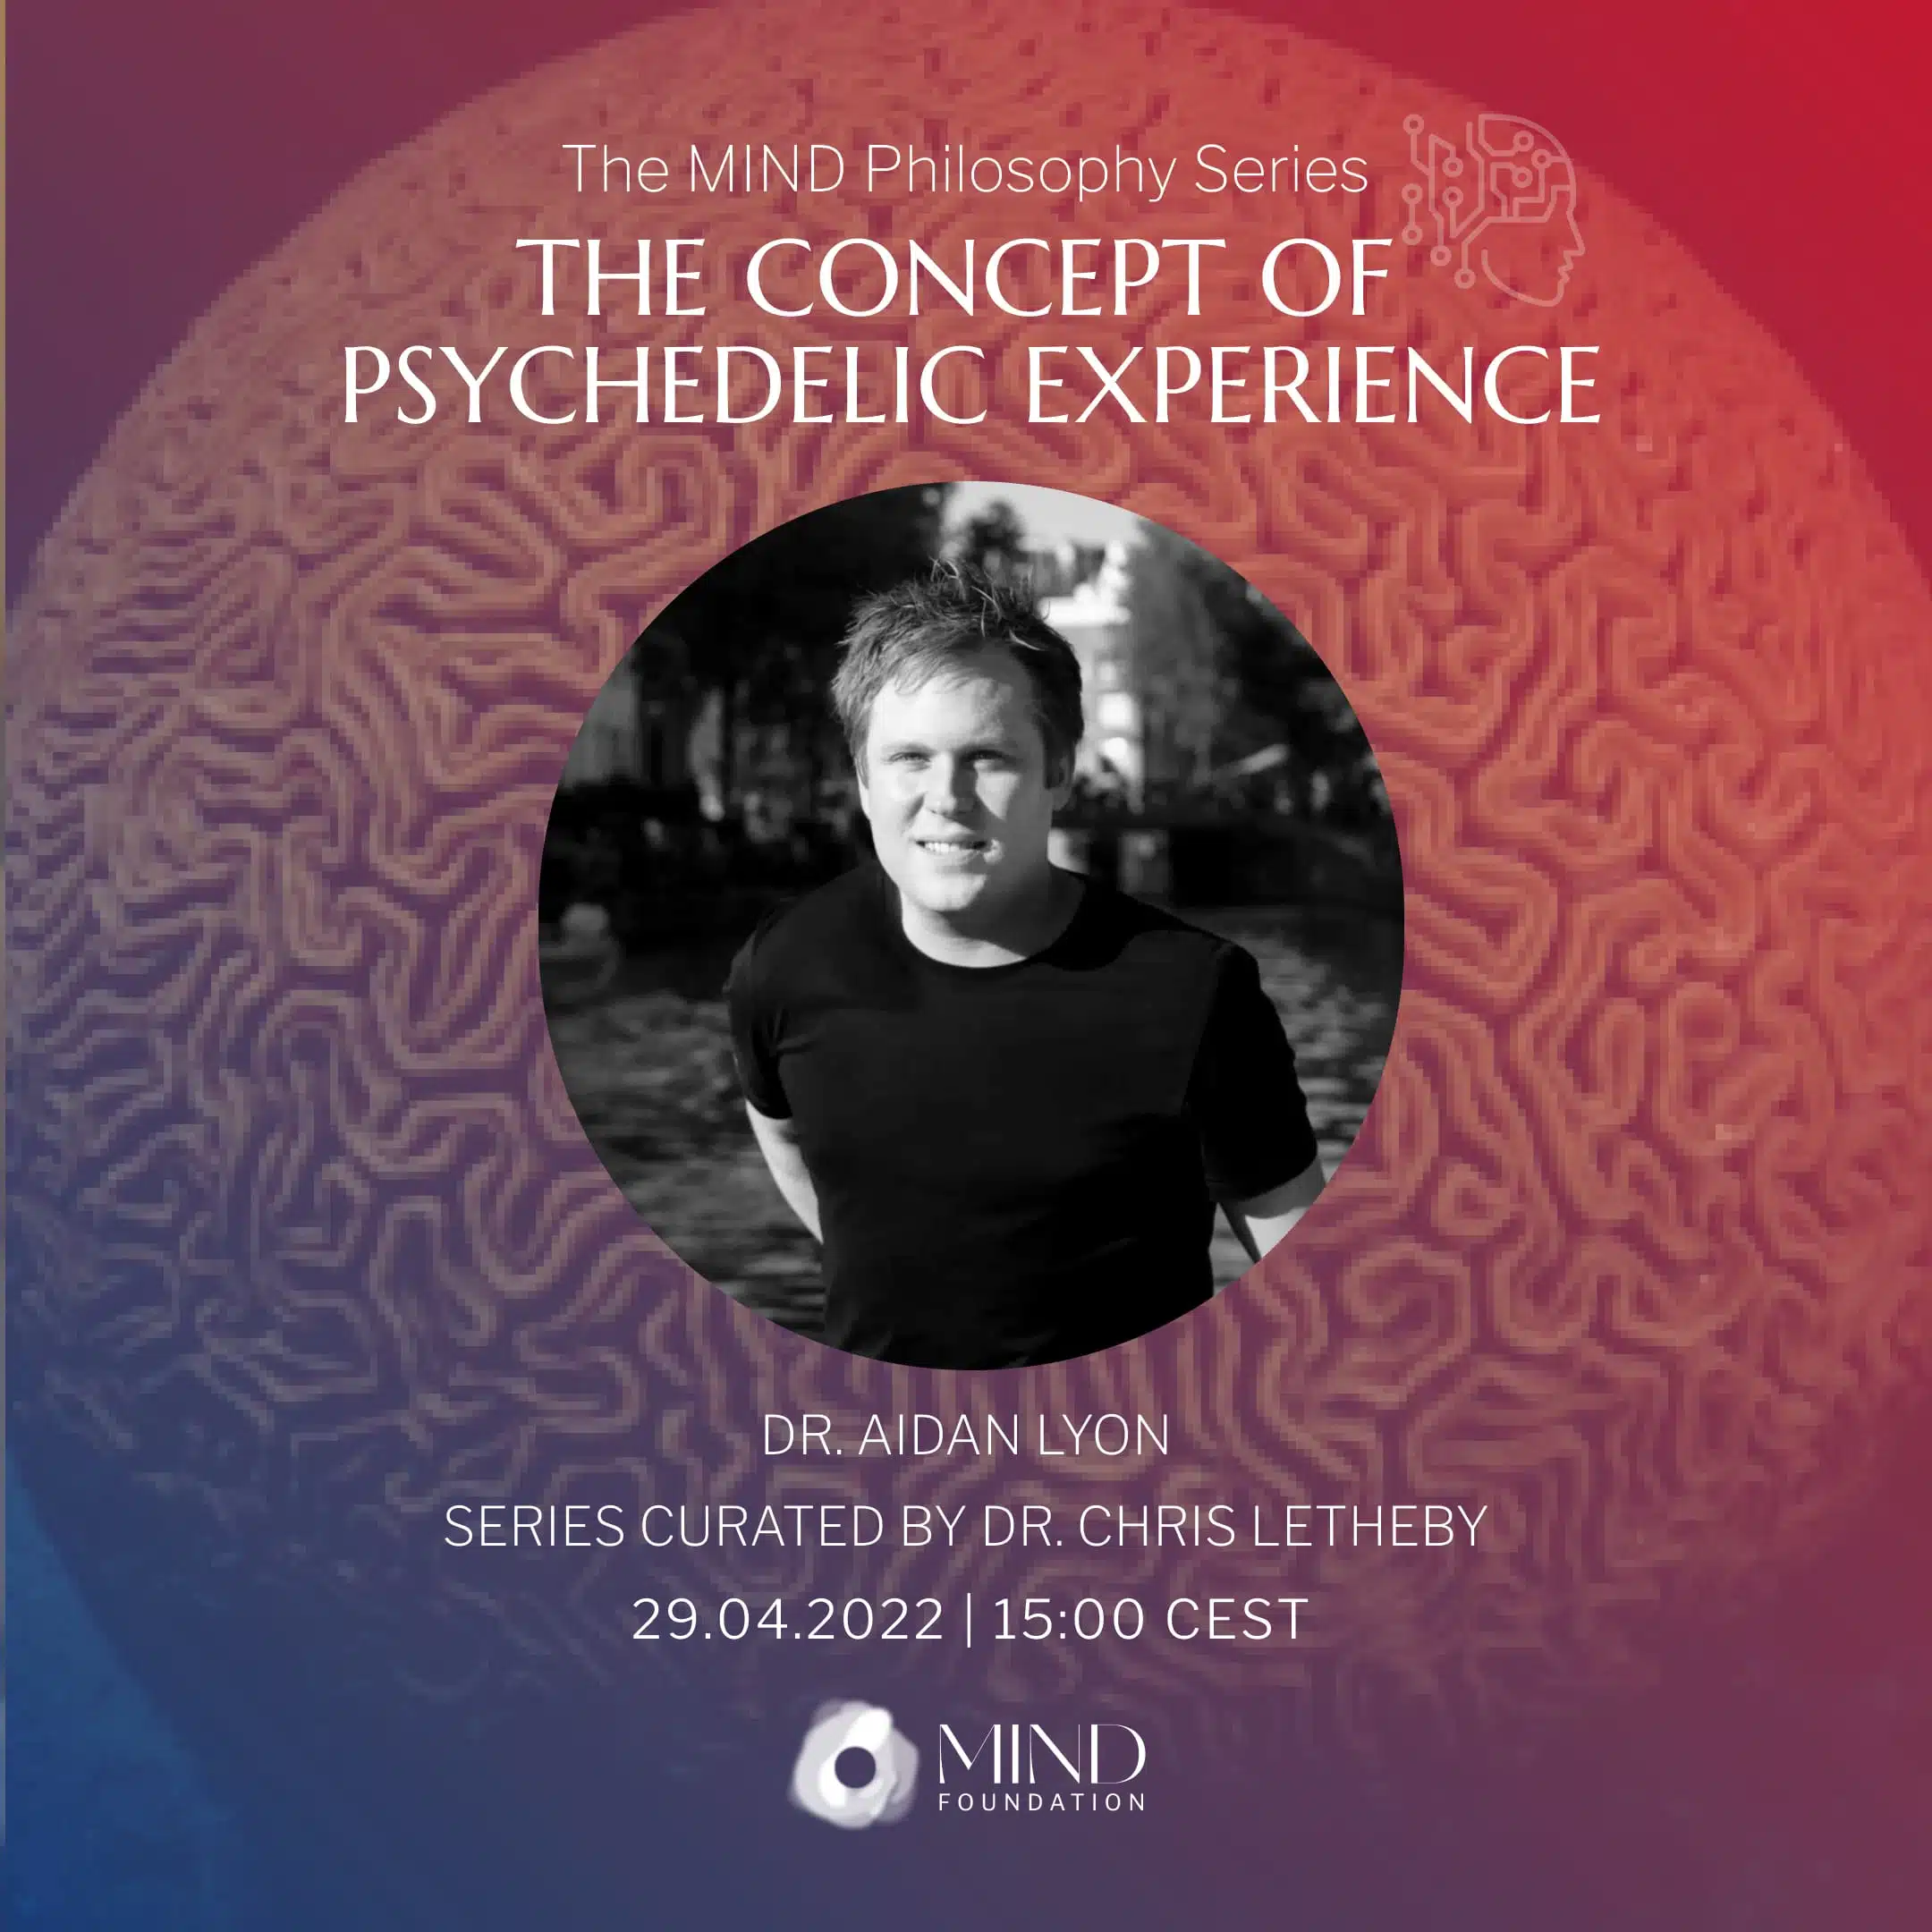 Dr. Aidan Lyon – The Concept of Psychedelic Experience